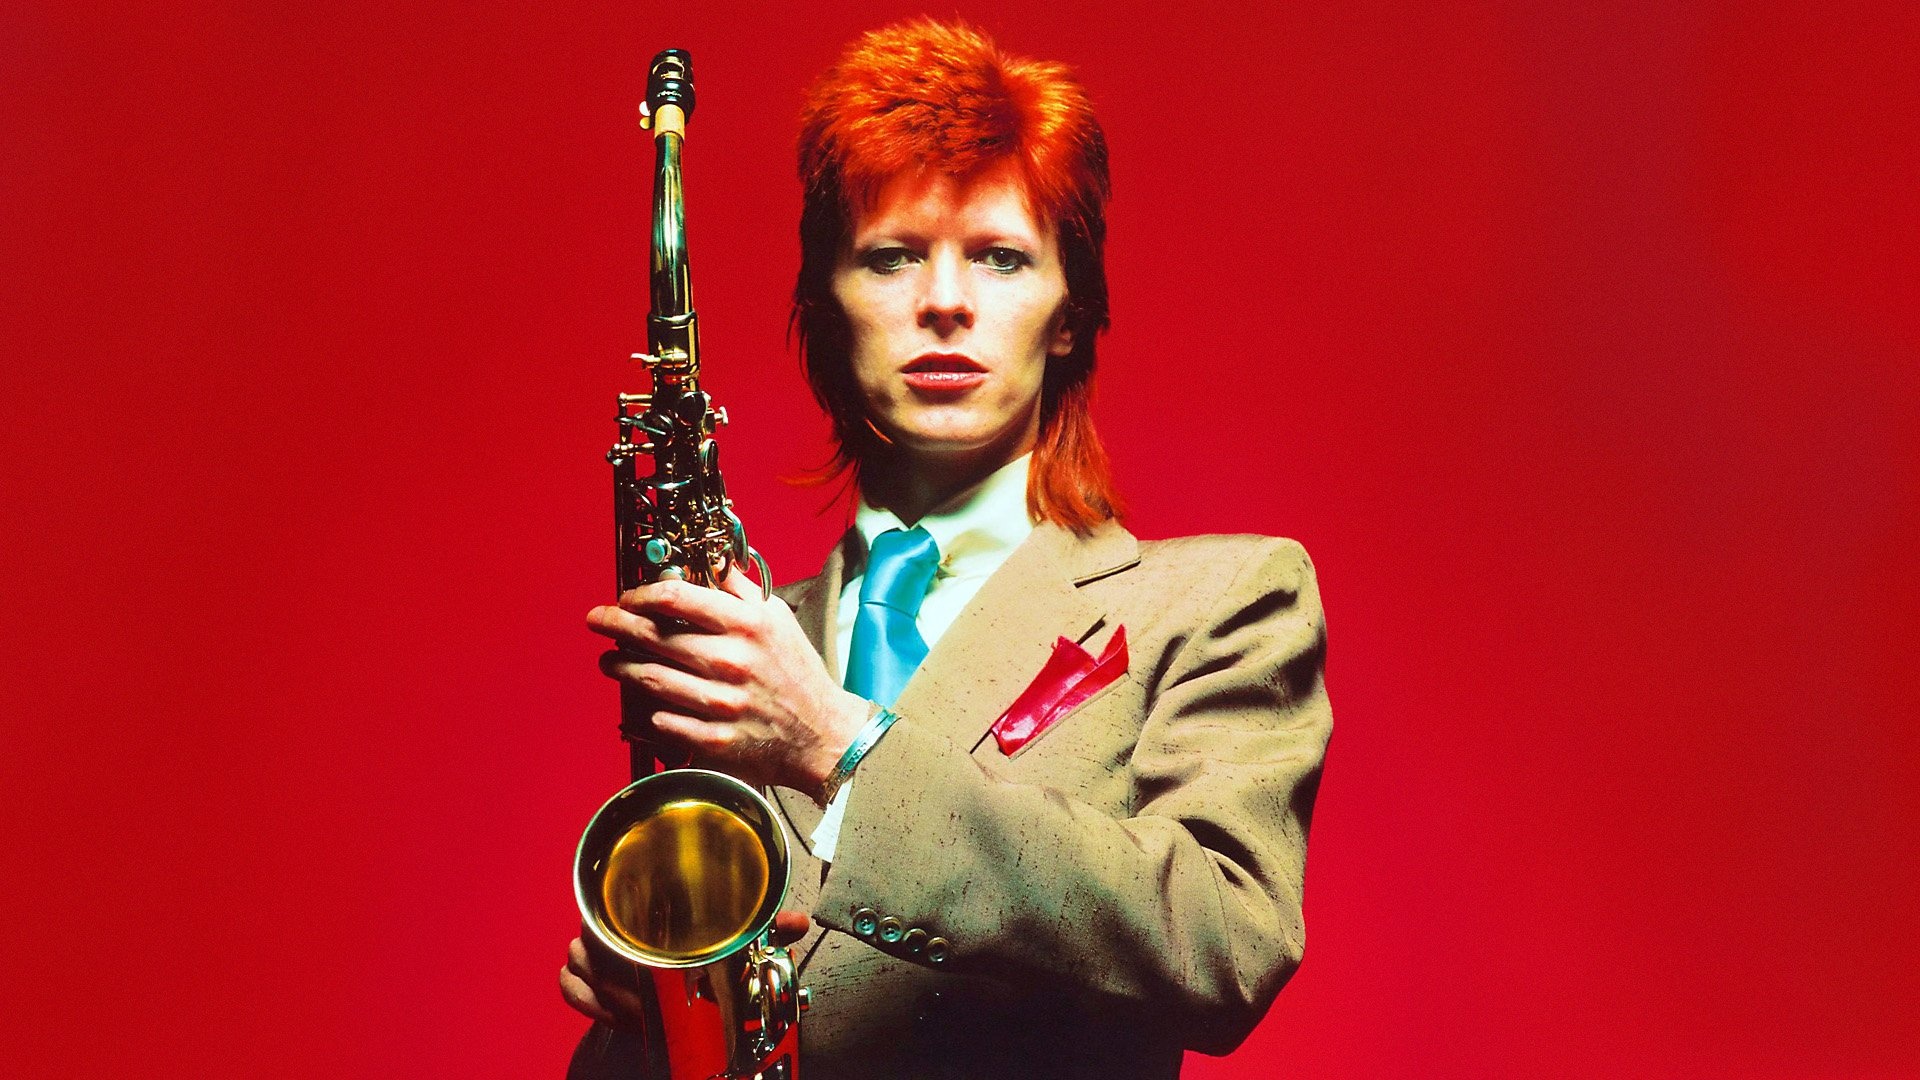 David Bowie: "The Jean Genie" was originally released in November 1972. 1920x1080 Full HD Background.